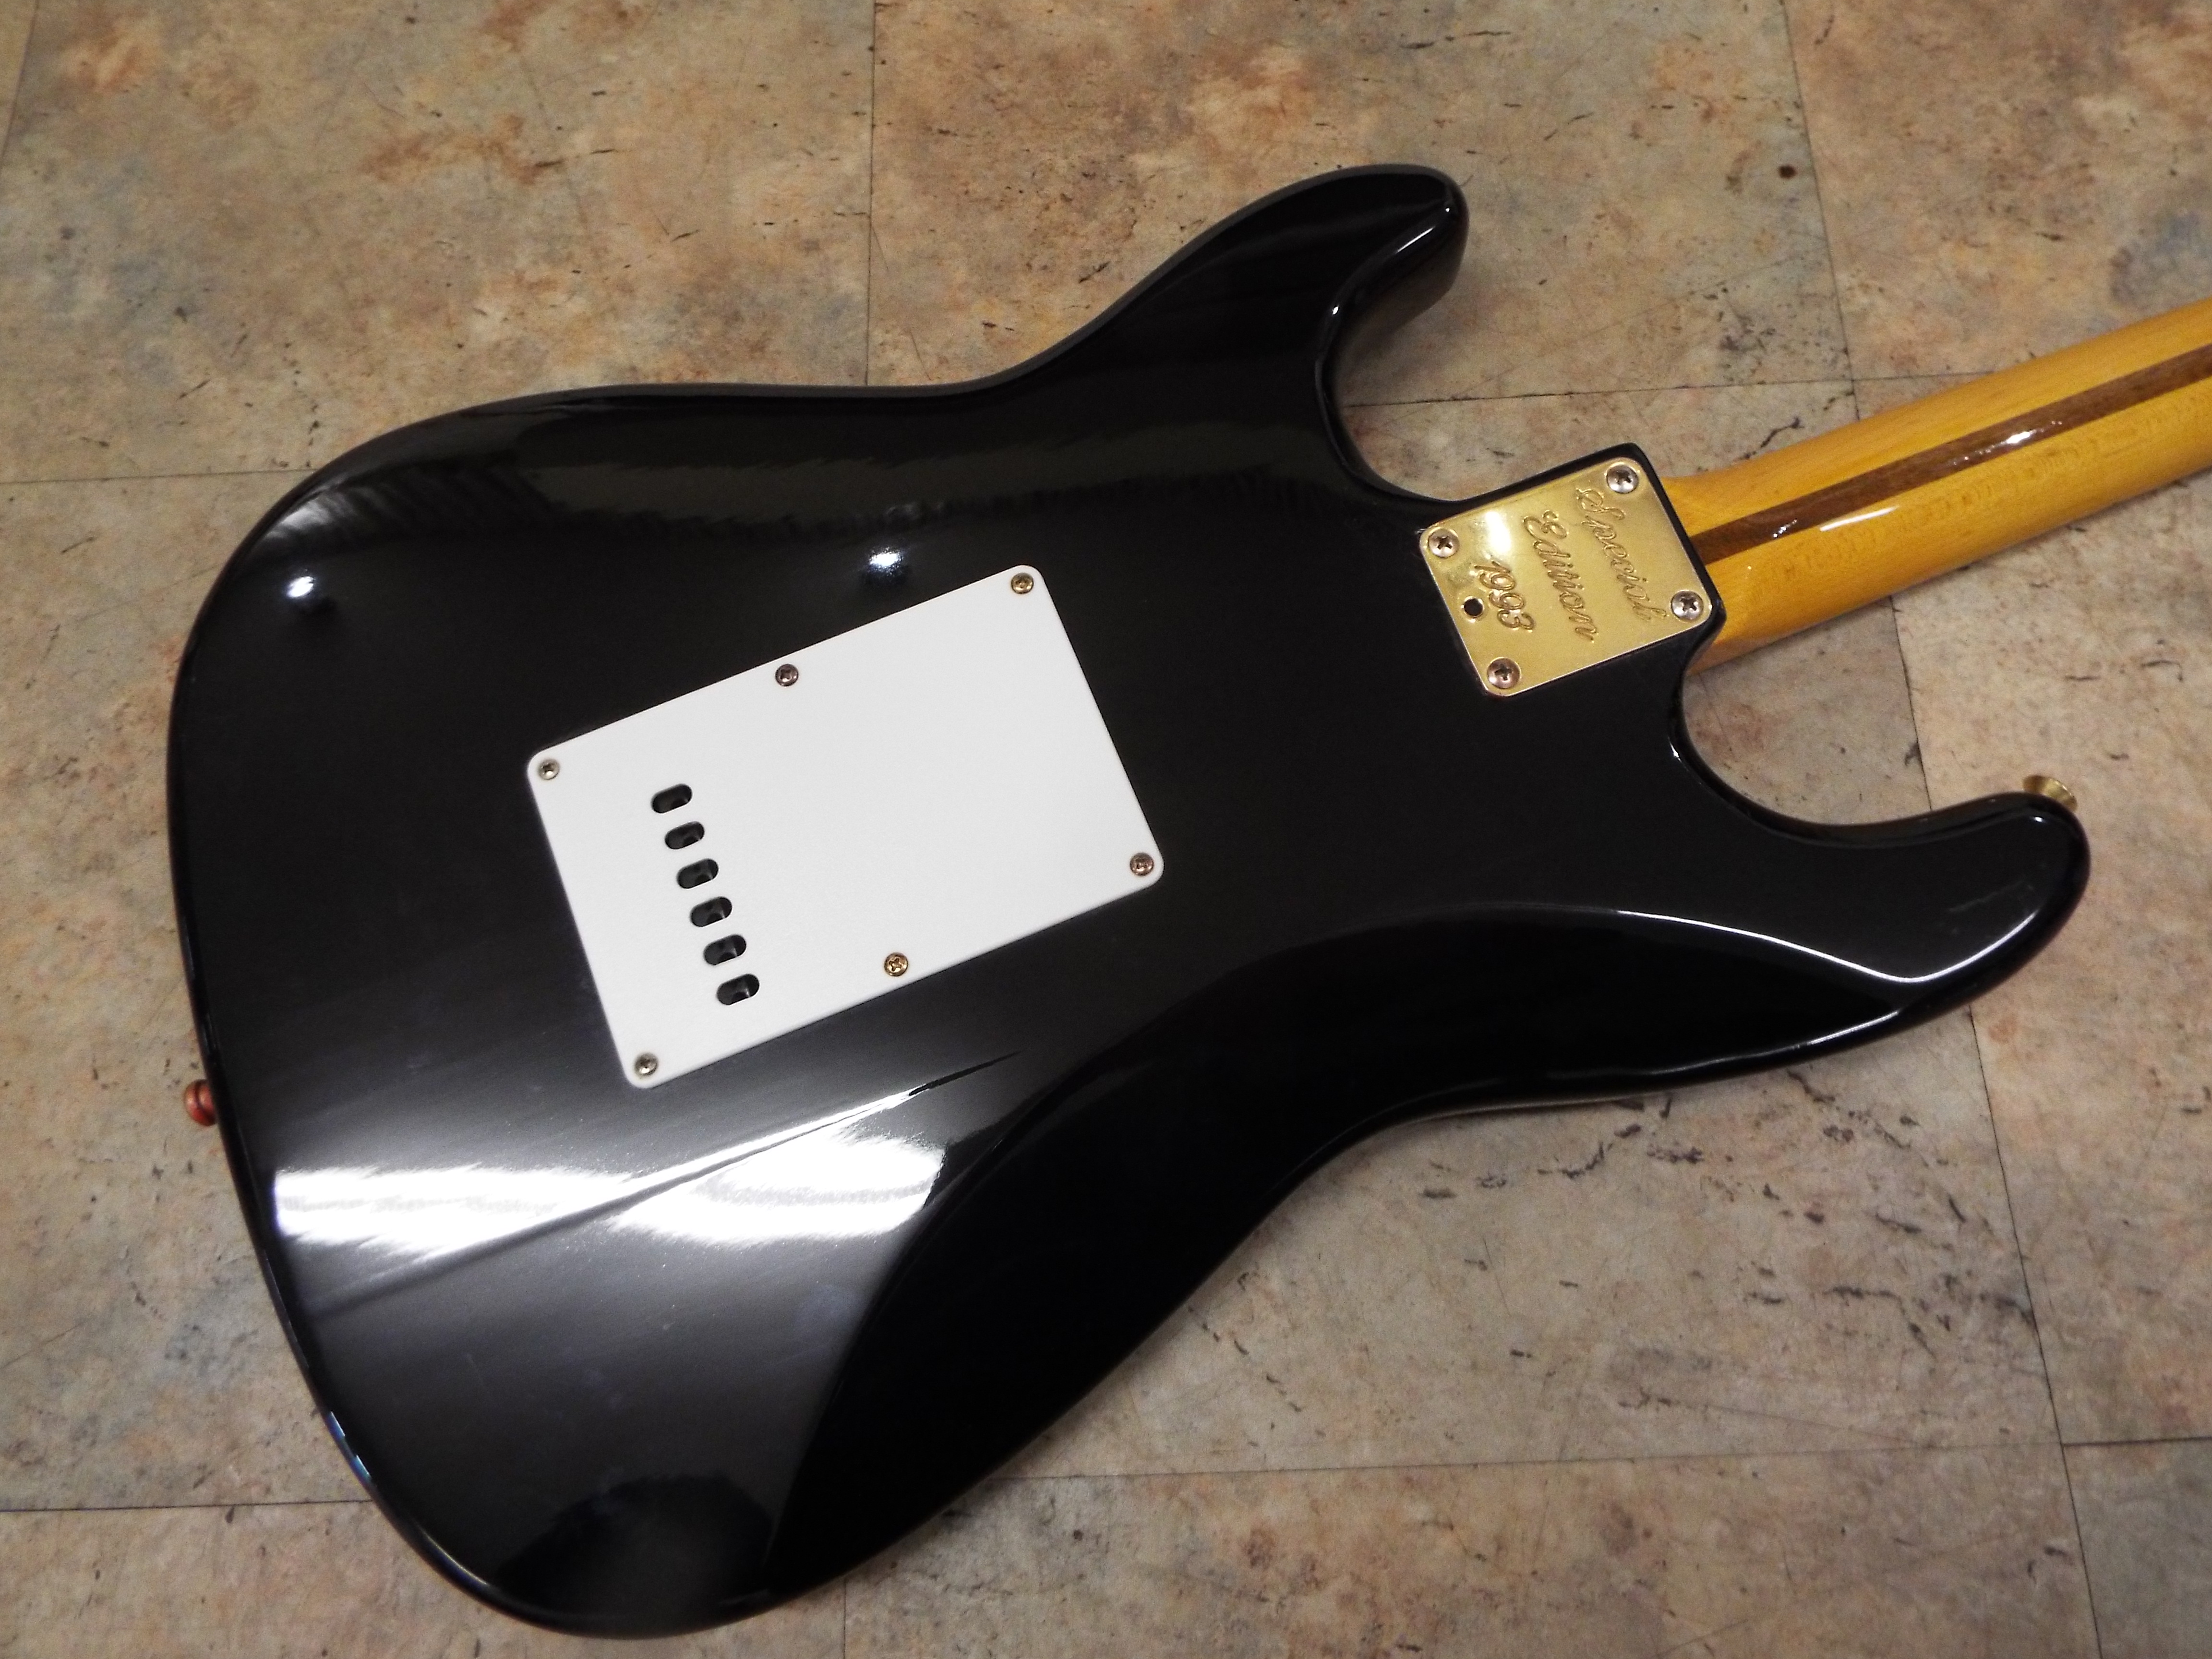 A Stratocaster shaped electric Guitar marked Fender with maple neck, - Image 5 of 8